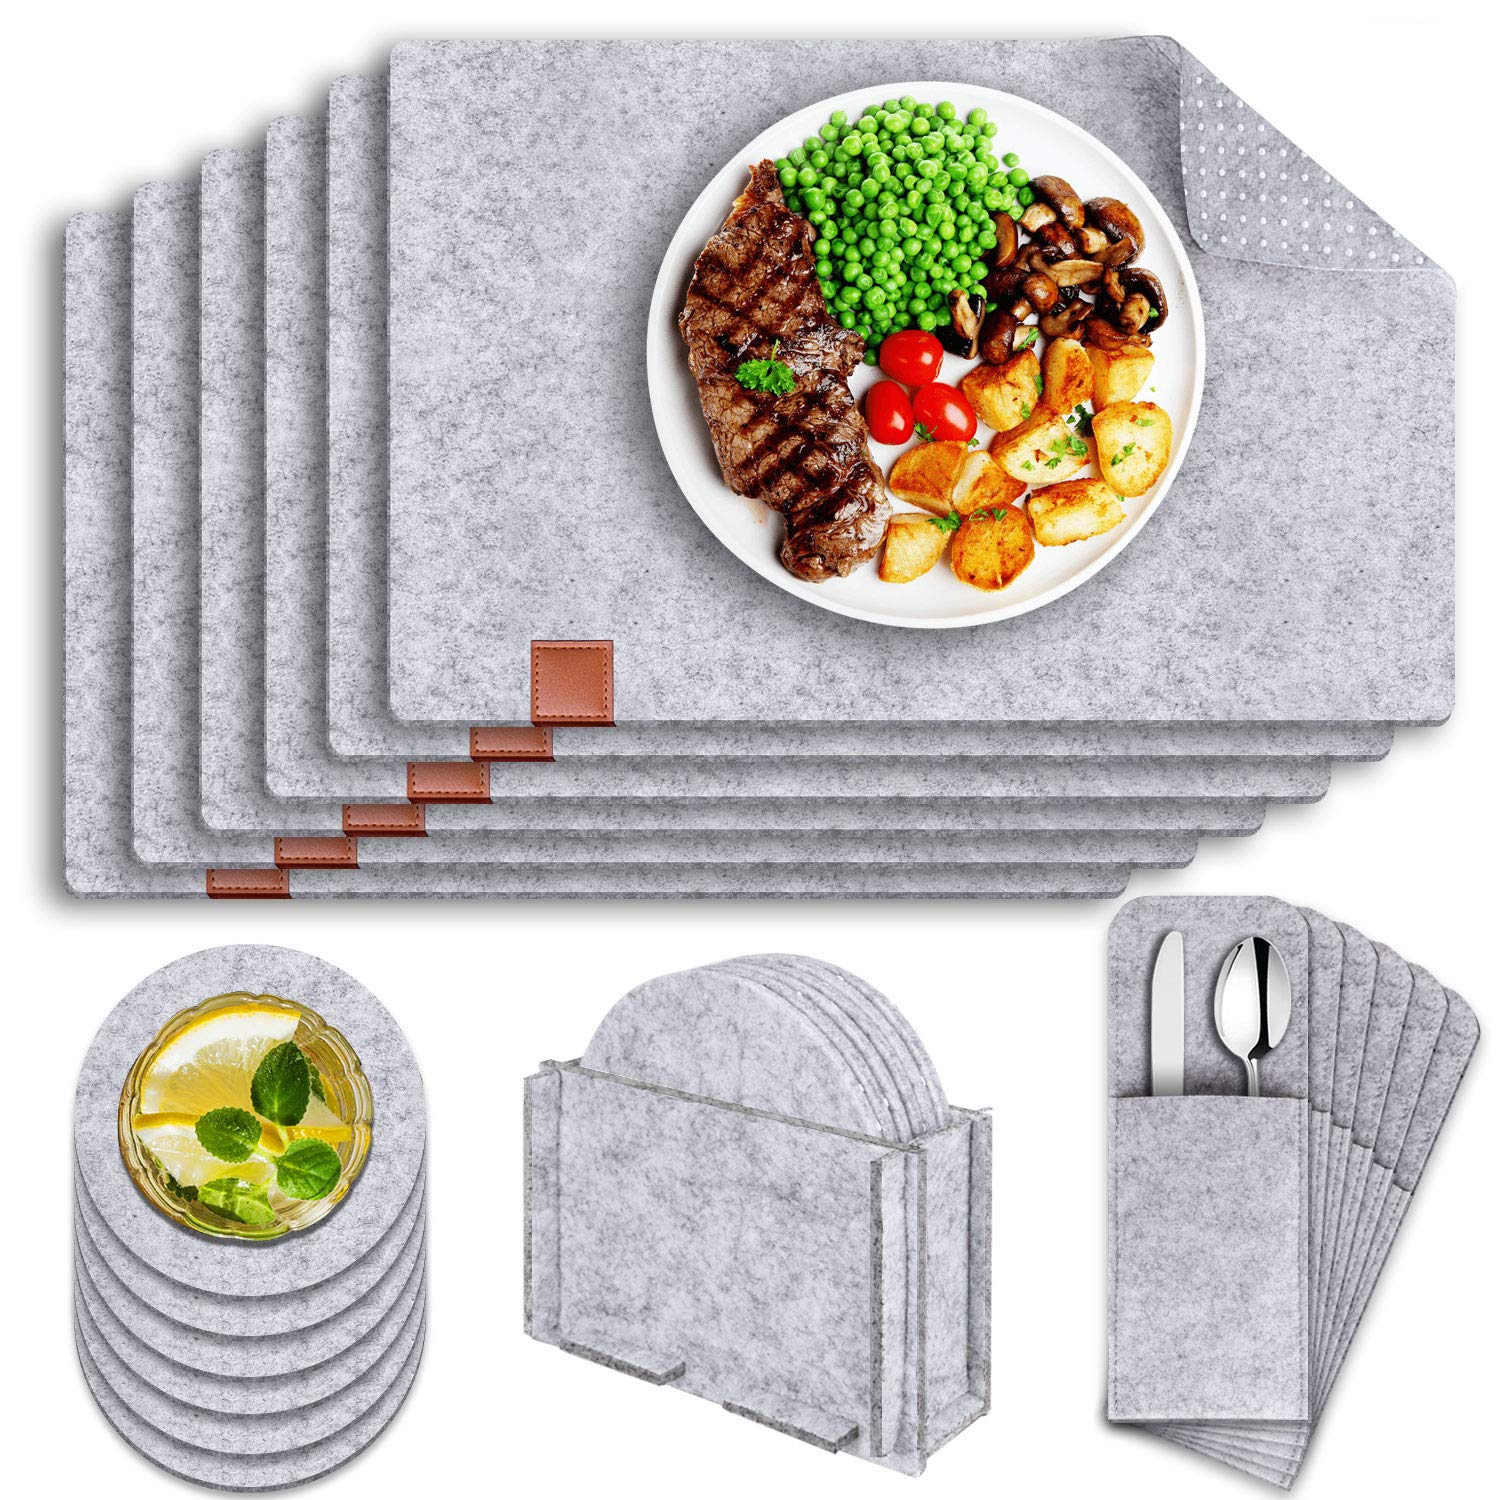 Jubor Non-Slip Felt Placemats, 19 Pcs Washable Felt Table Mats, Place Mats with Coasters, Cultery Bags And Storage Box, Heat-Resistant and Wipeable Placemat Set for Dining Party Home Restaurant